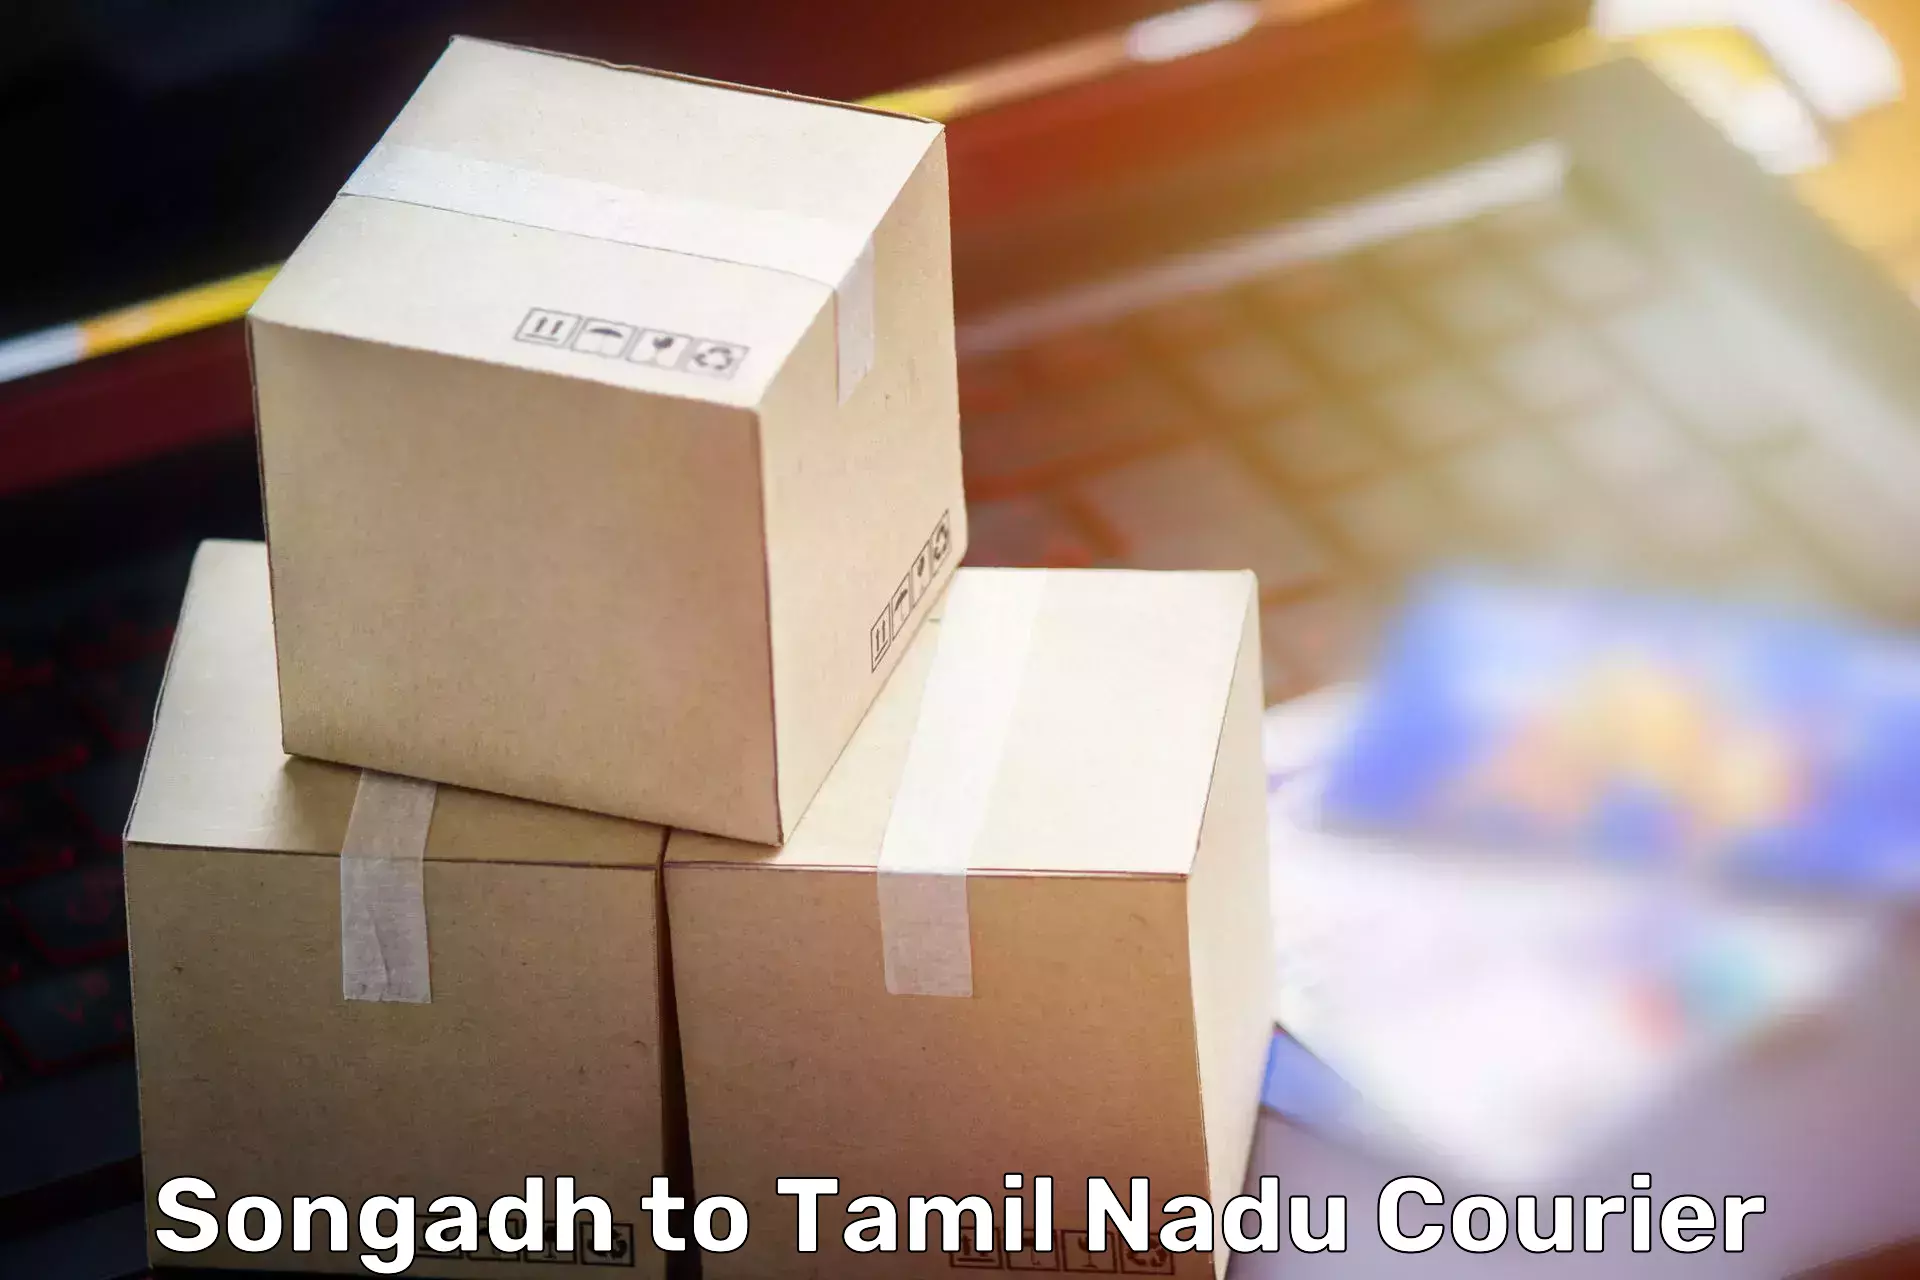 Quality relocation assistance Songadh to Thiruporur